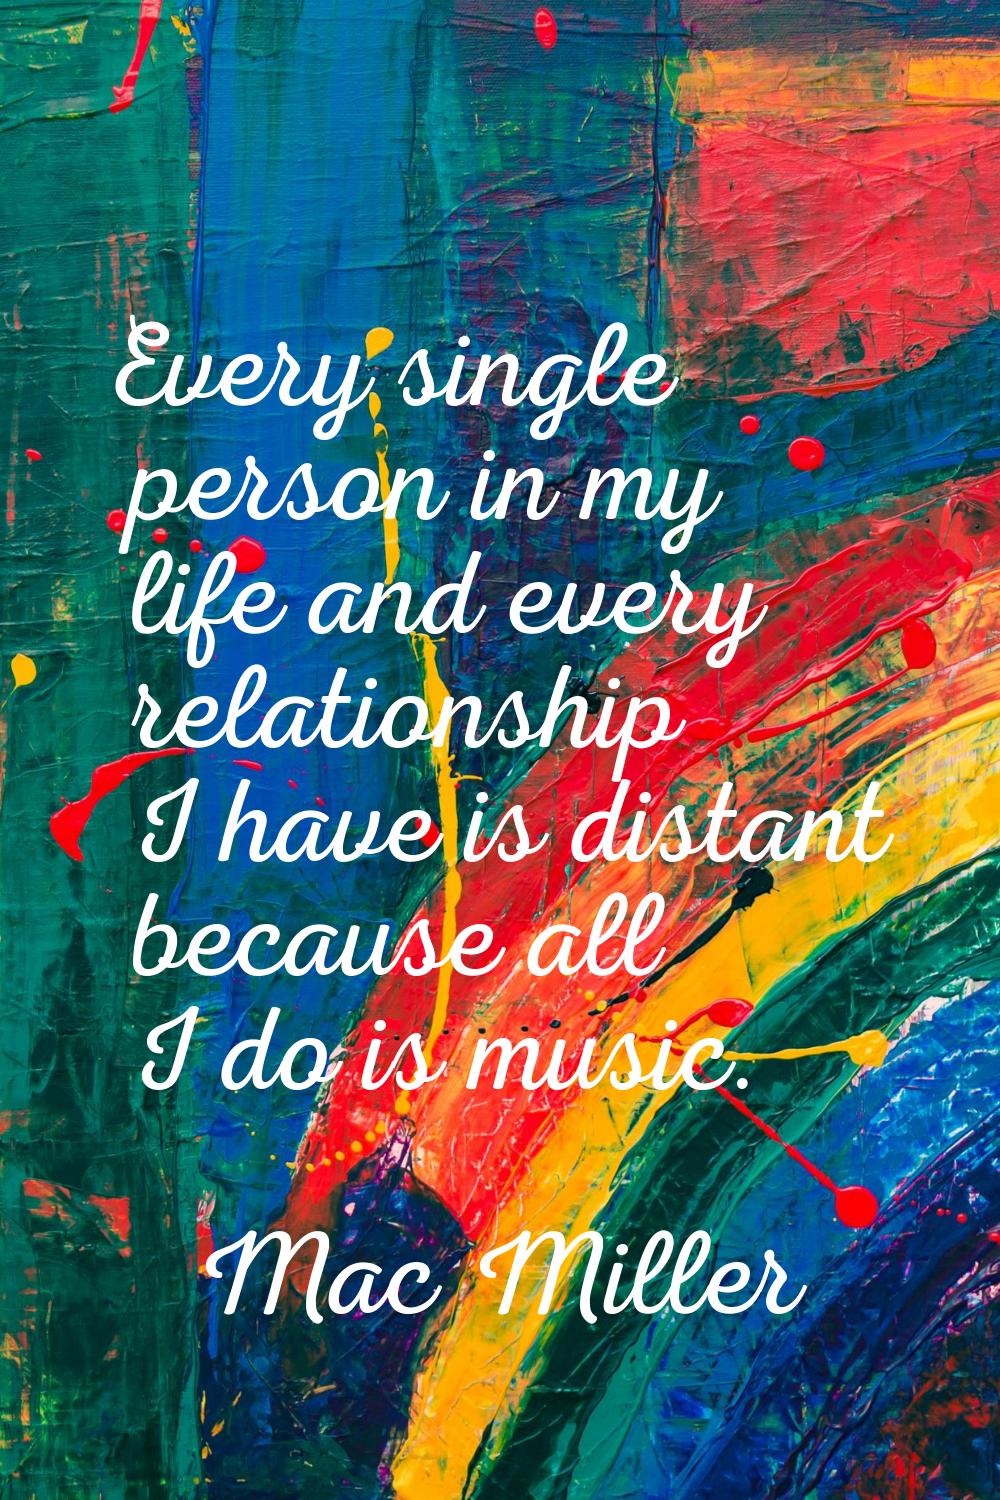 Every single person in my life and every relationship I have is distant because all I do is music.